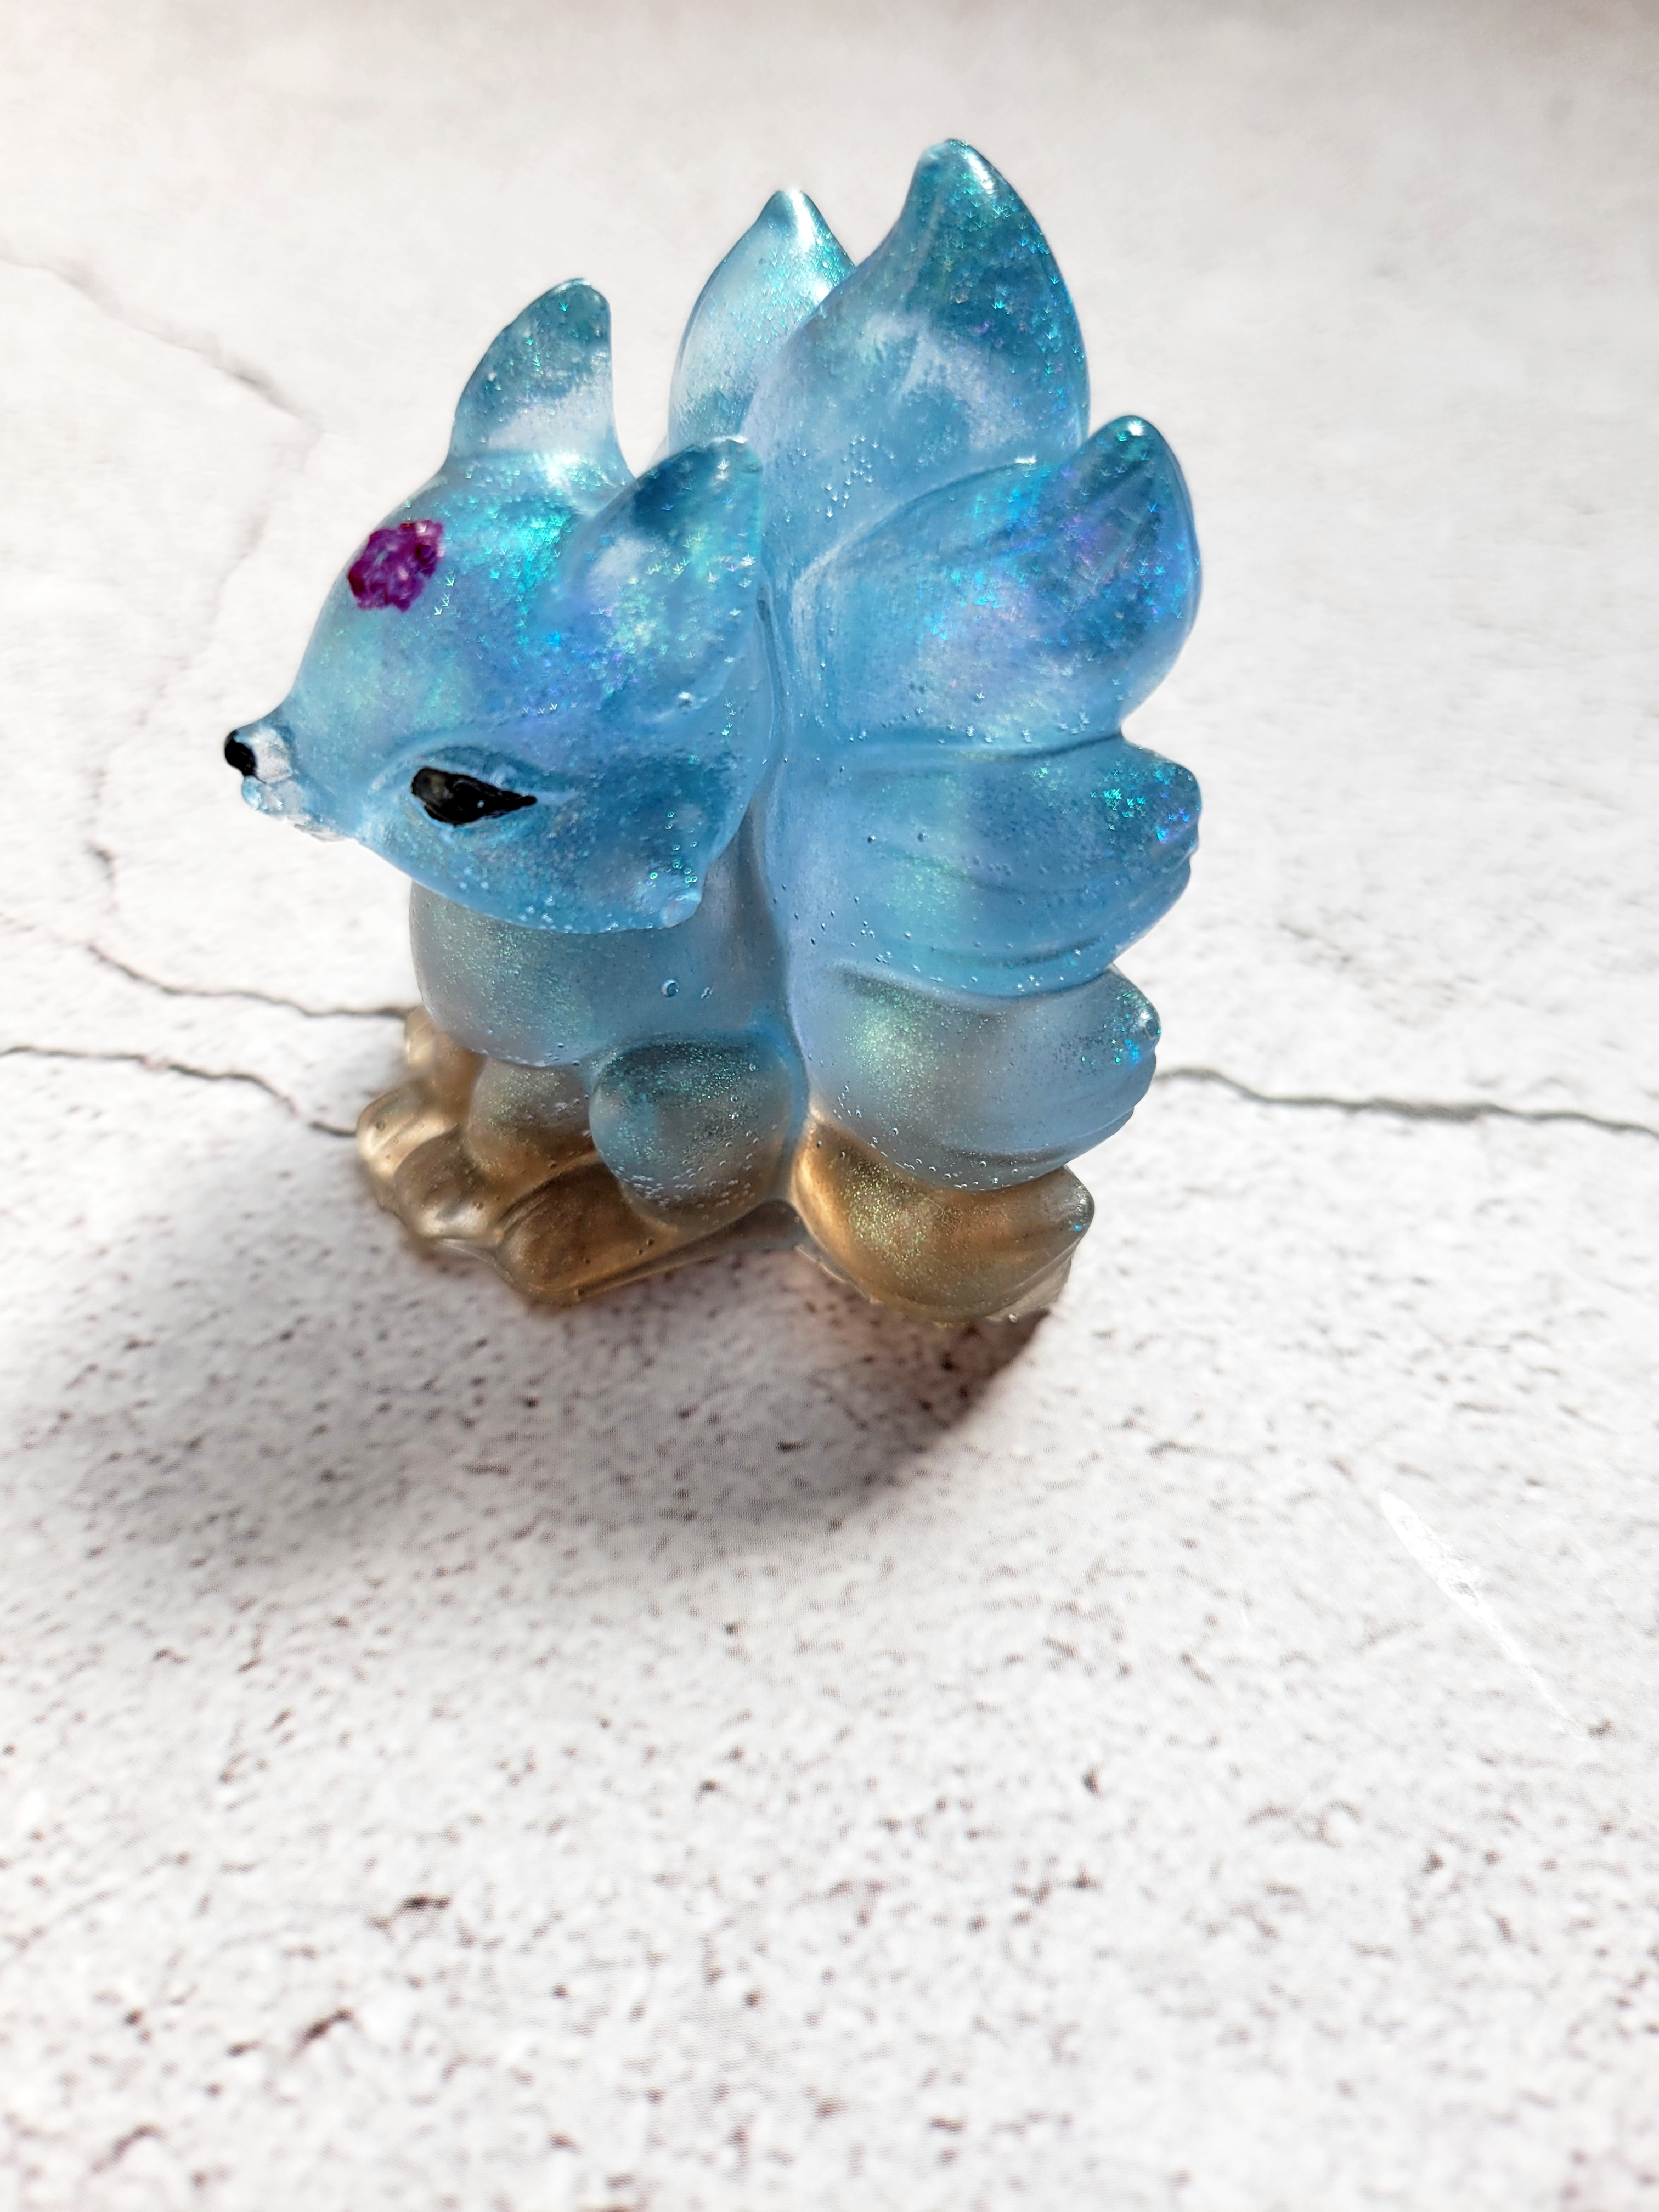 A side view of a kitsune fox figure with nine tails. It is blue and tan, with black painted eyes and nose, with a purple flower on its head.